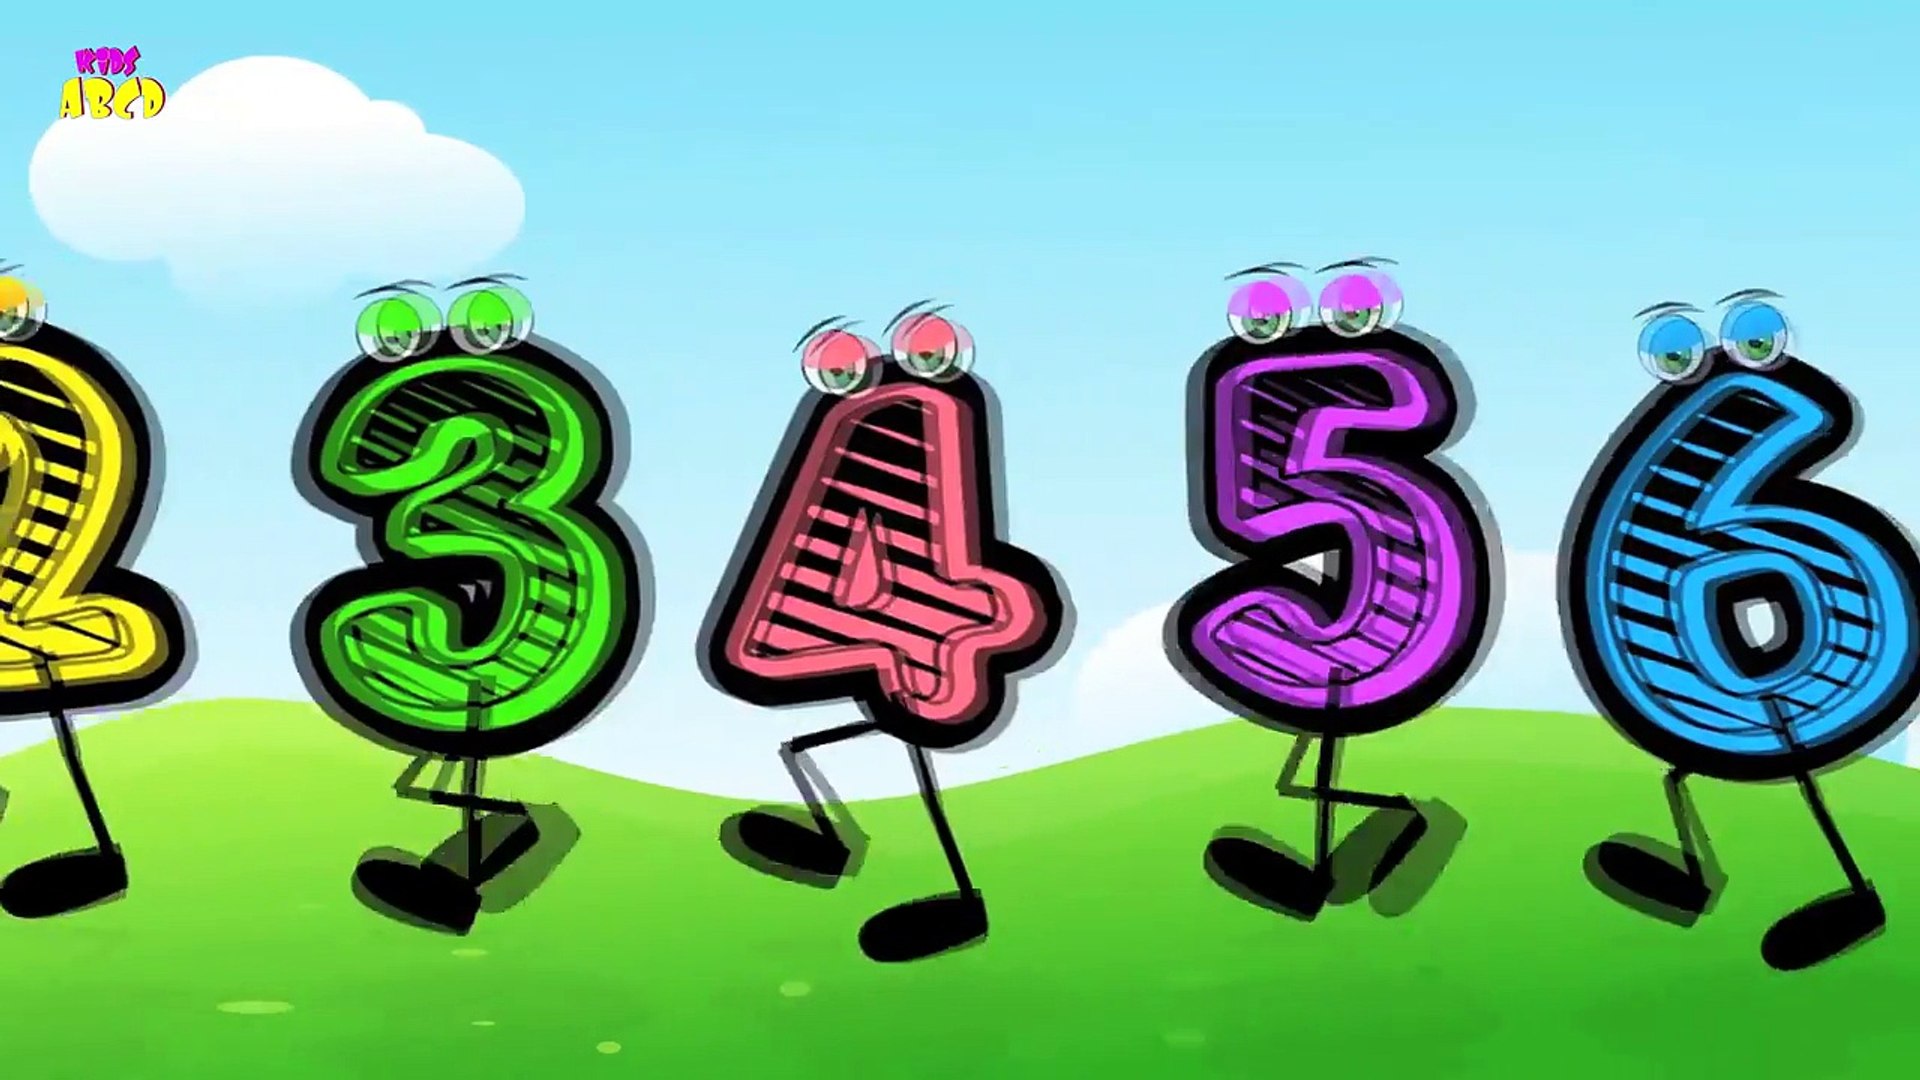 Numbers Song | Children Songs | Learn English Numbers Song | 10 Little Numbers